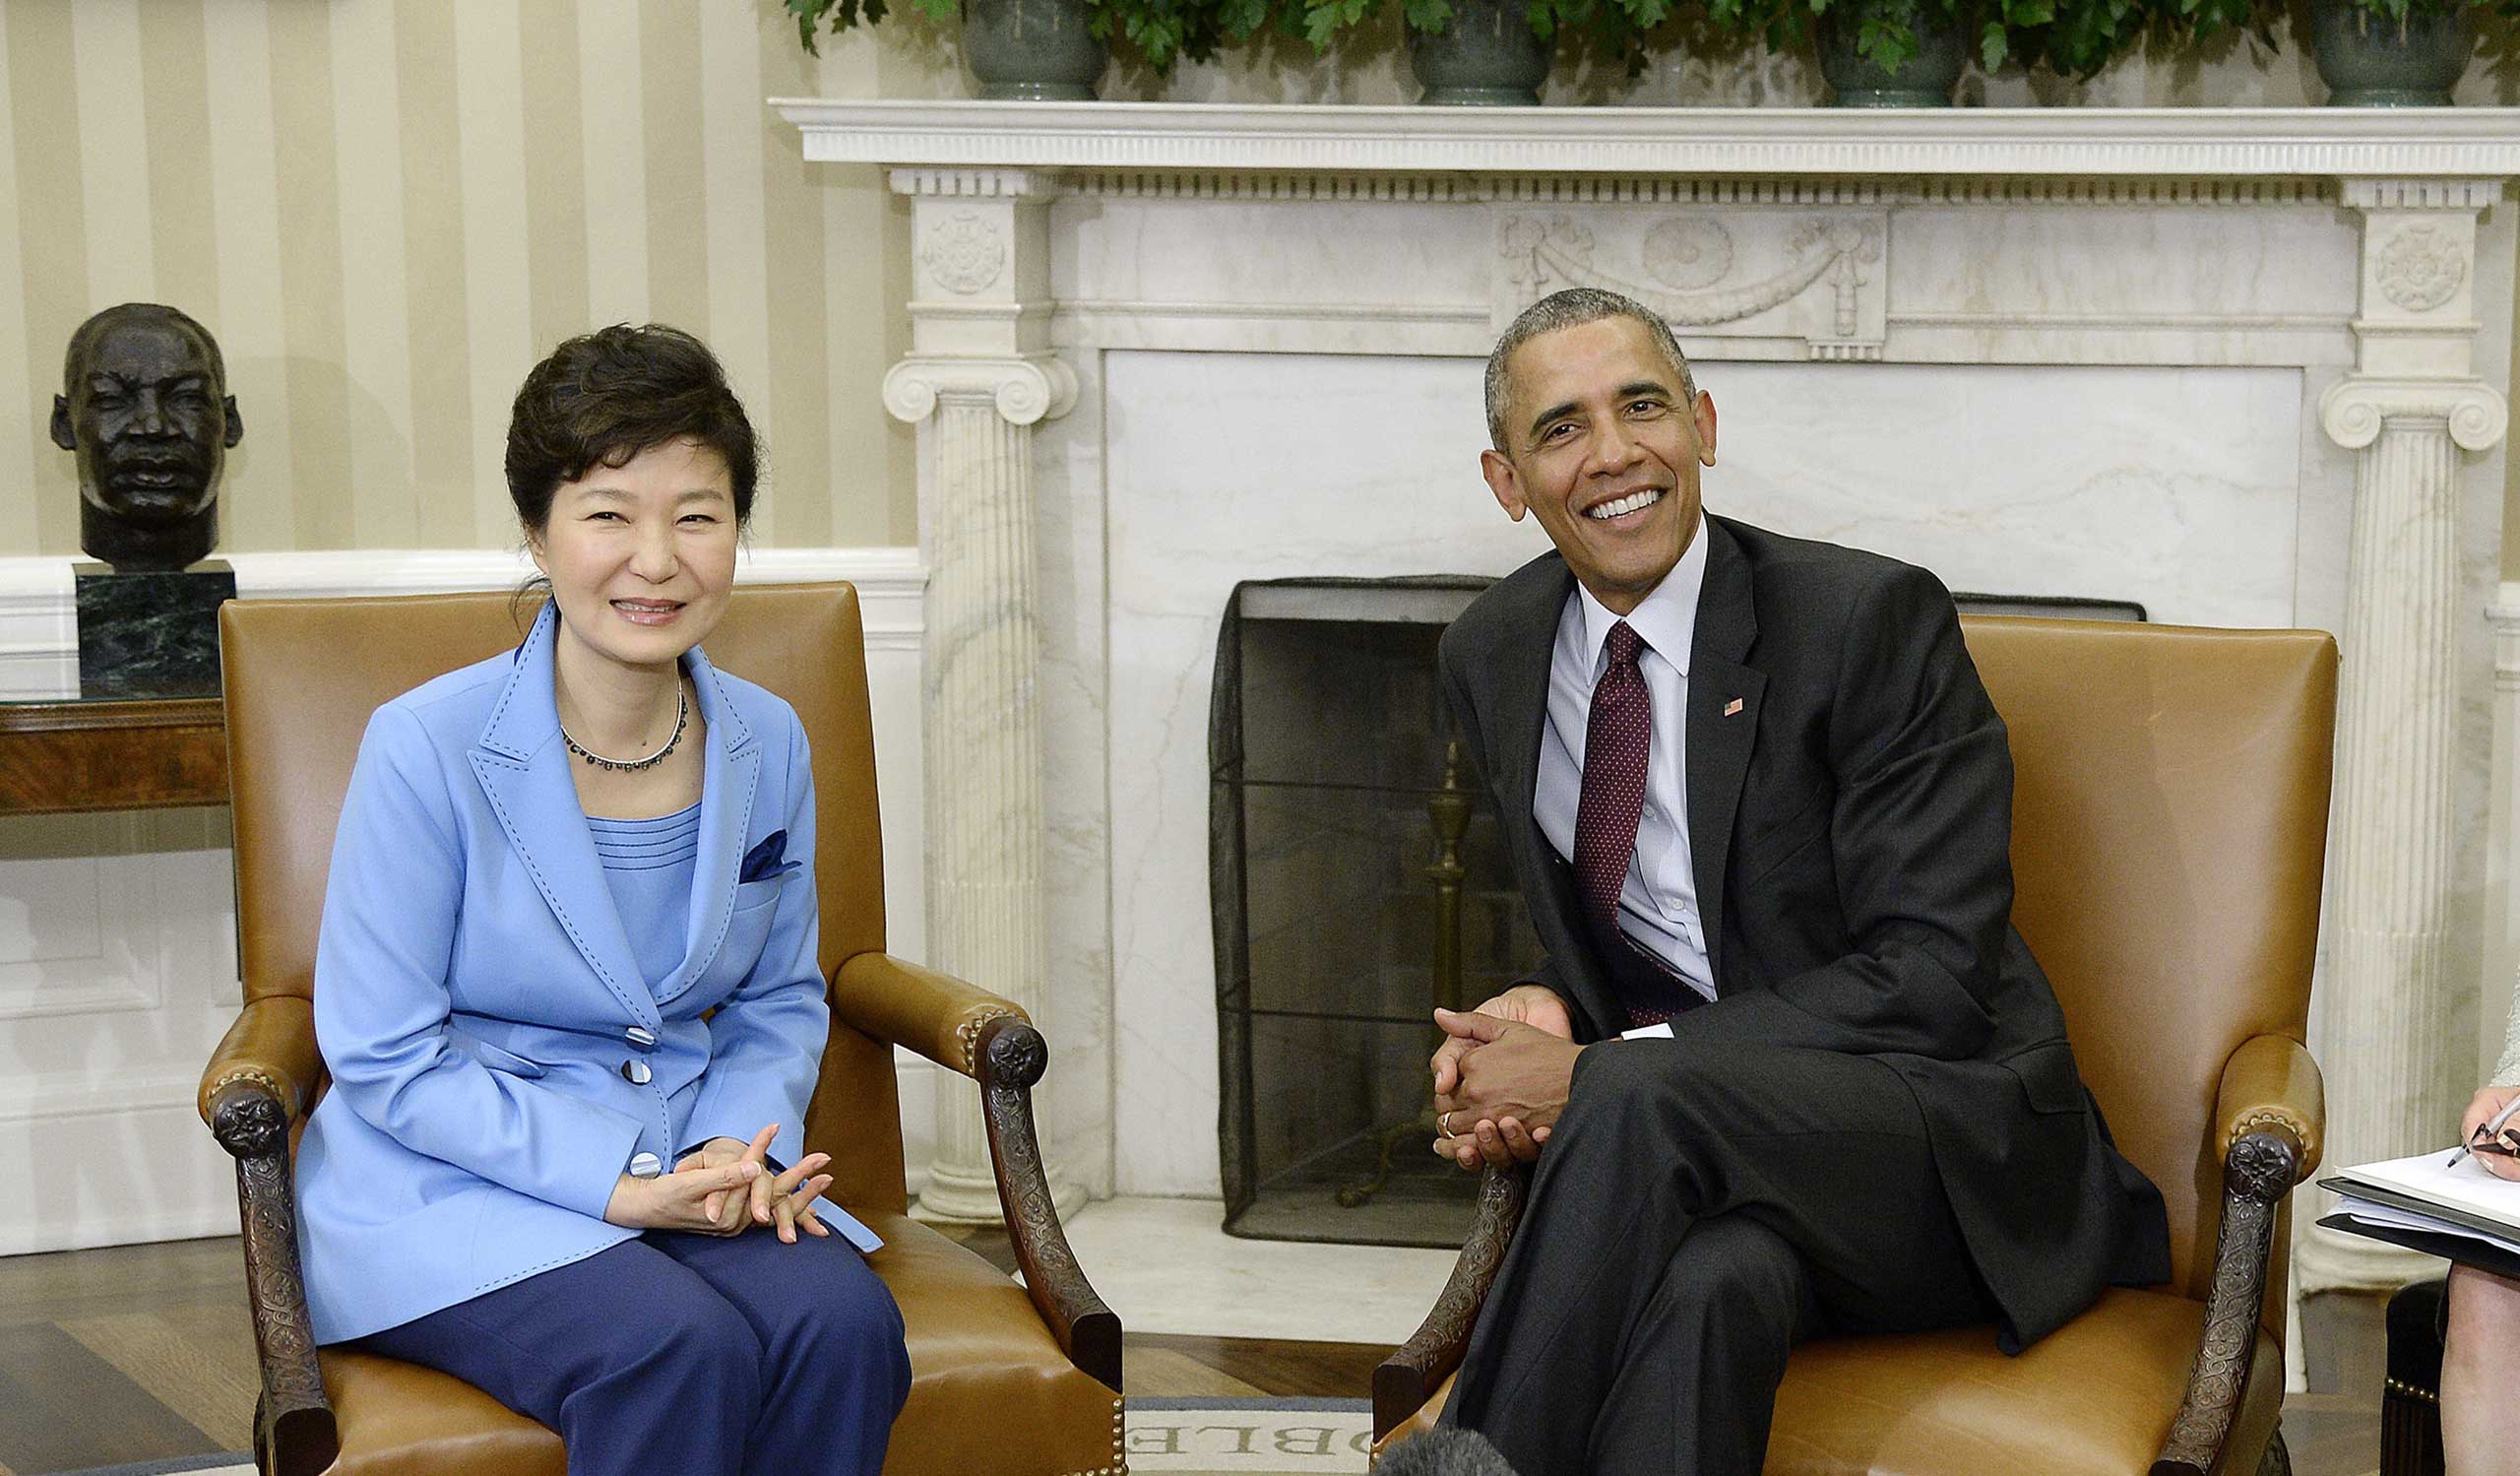 U.S. President Barack Obama meets with President Park Geun-hye of the Republic of Korea to the White House for a bilateral meeting in the Oval Office in Washington, D.C., on Oct. 16, 2015. (Getty Images)